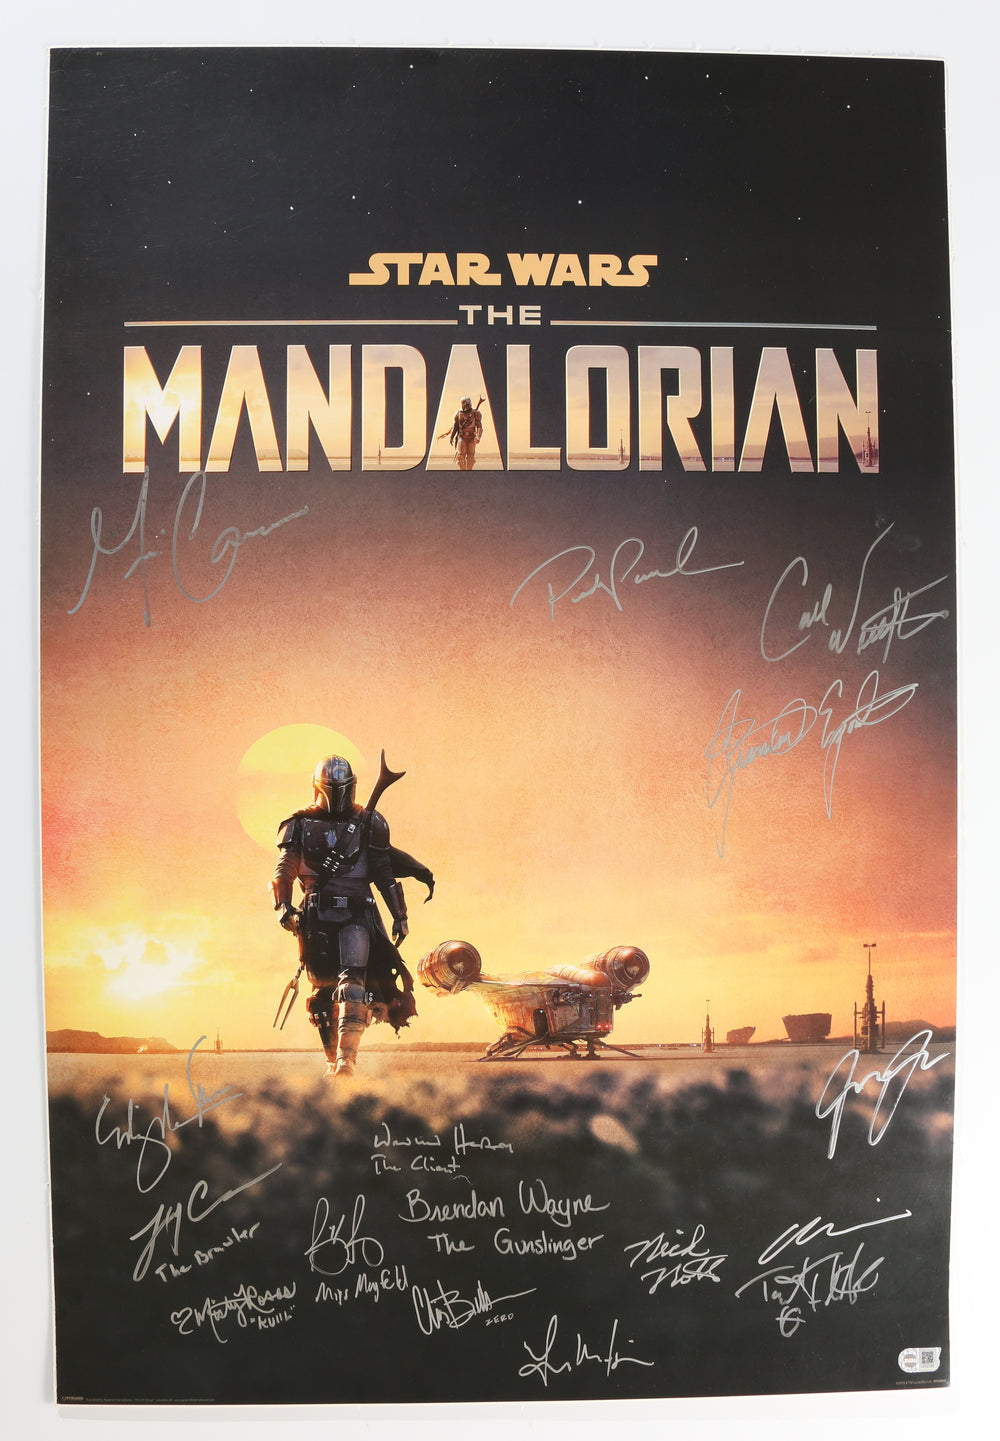 Star Wars: The Mandalorian 22x34 Poster (SWAU Witnessed) Cast Signed by Pedro Pascal, Gina Carano, Giancarlo Esposito, Carl Weathers, Werner Herzog, Misty Rosas, Nick Nolte and Others